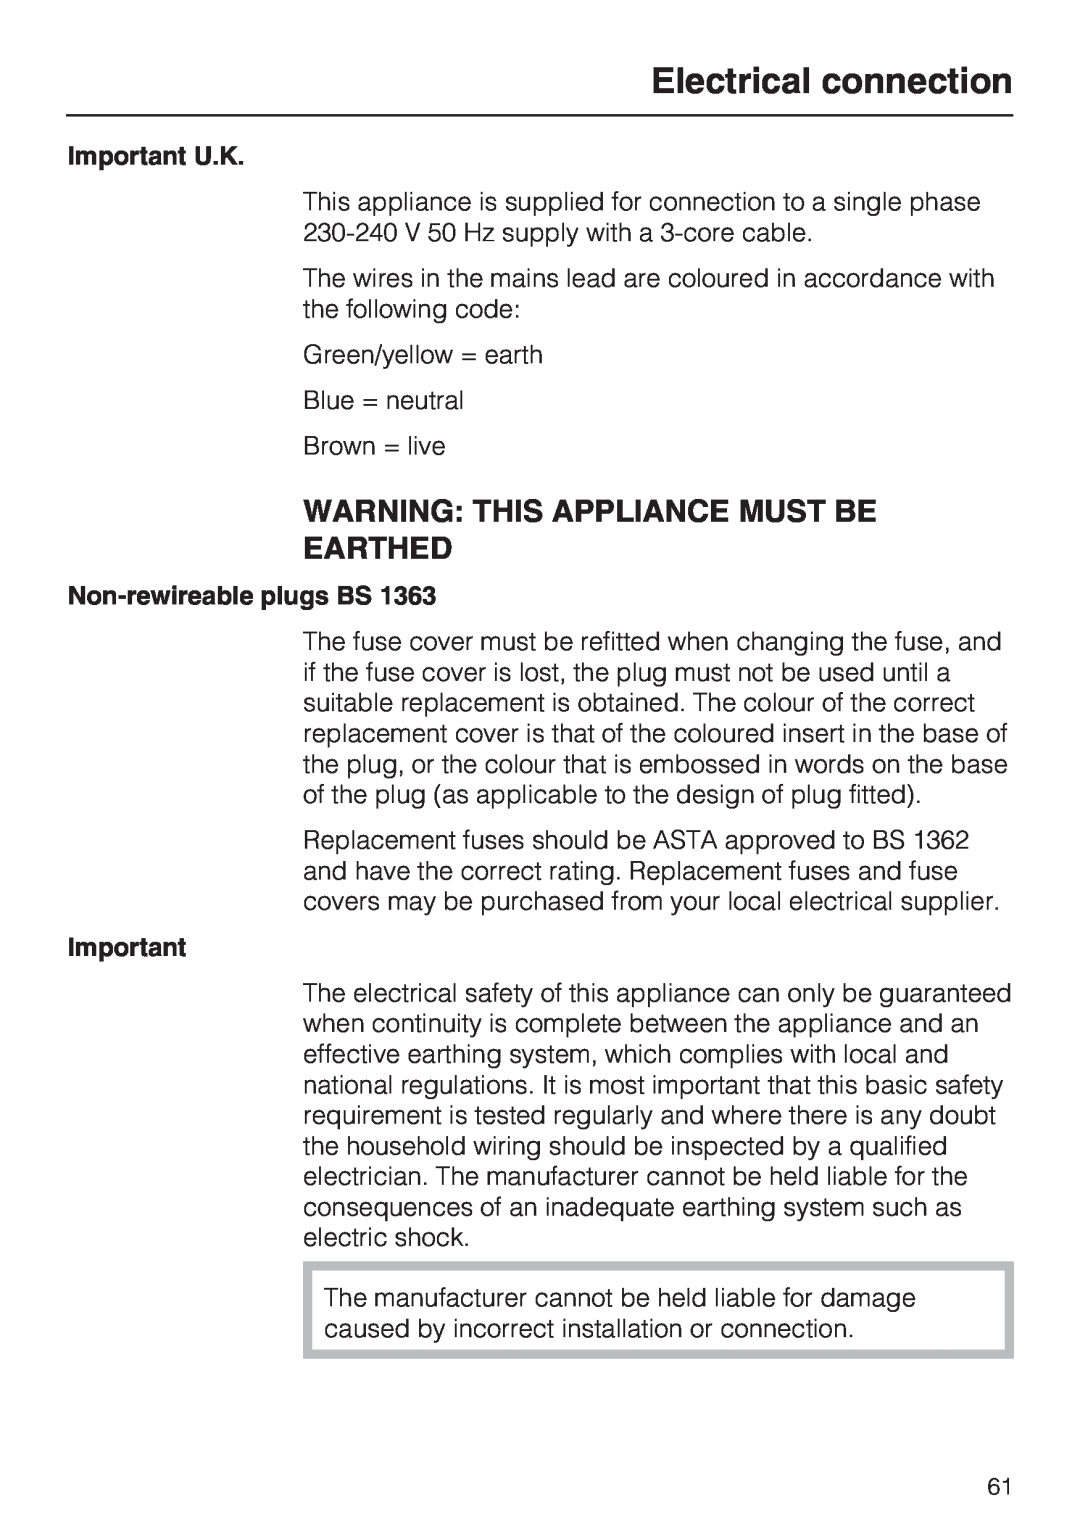 Miele DG 5088 Warning This Appliance Must Be Earthed, Electrical connection, Important U.K, Non-rewireable plugs BS 